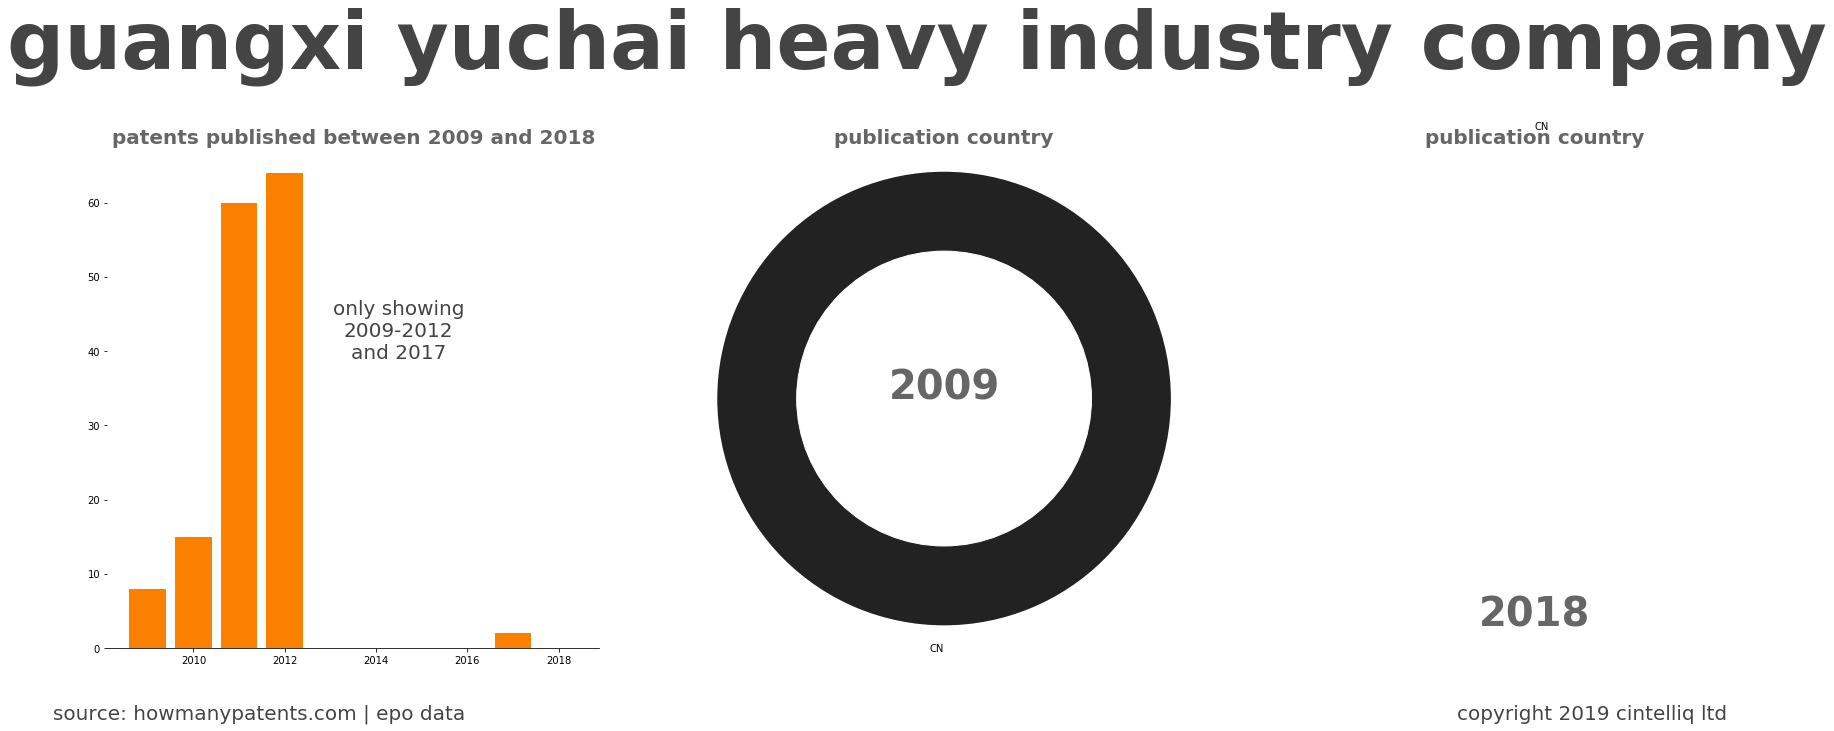 summary of patents for Guangxi Yuchai Heavy Industry Company